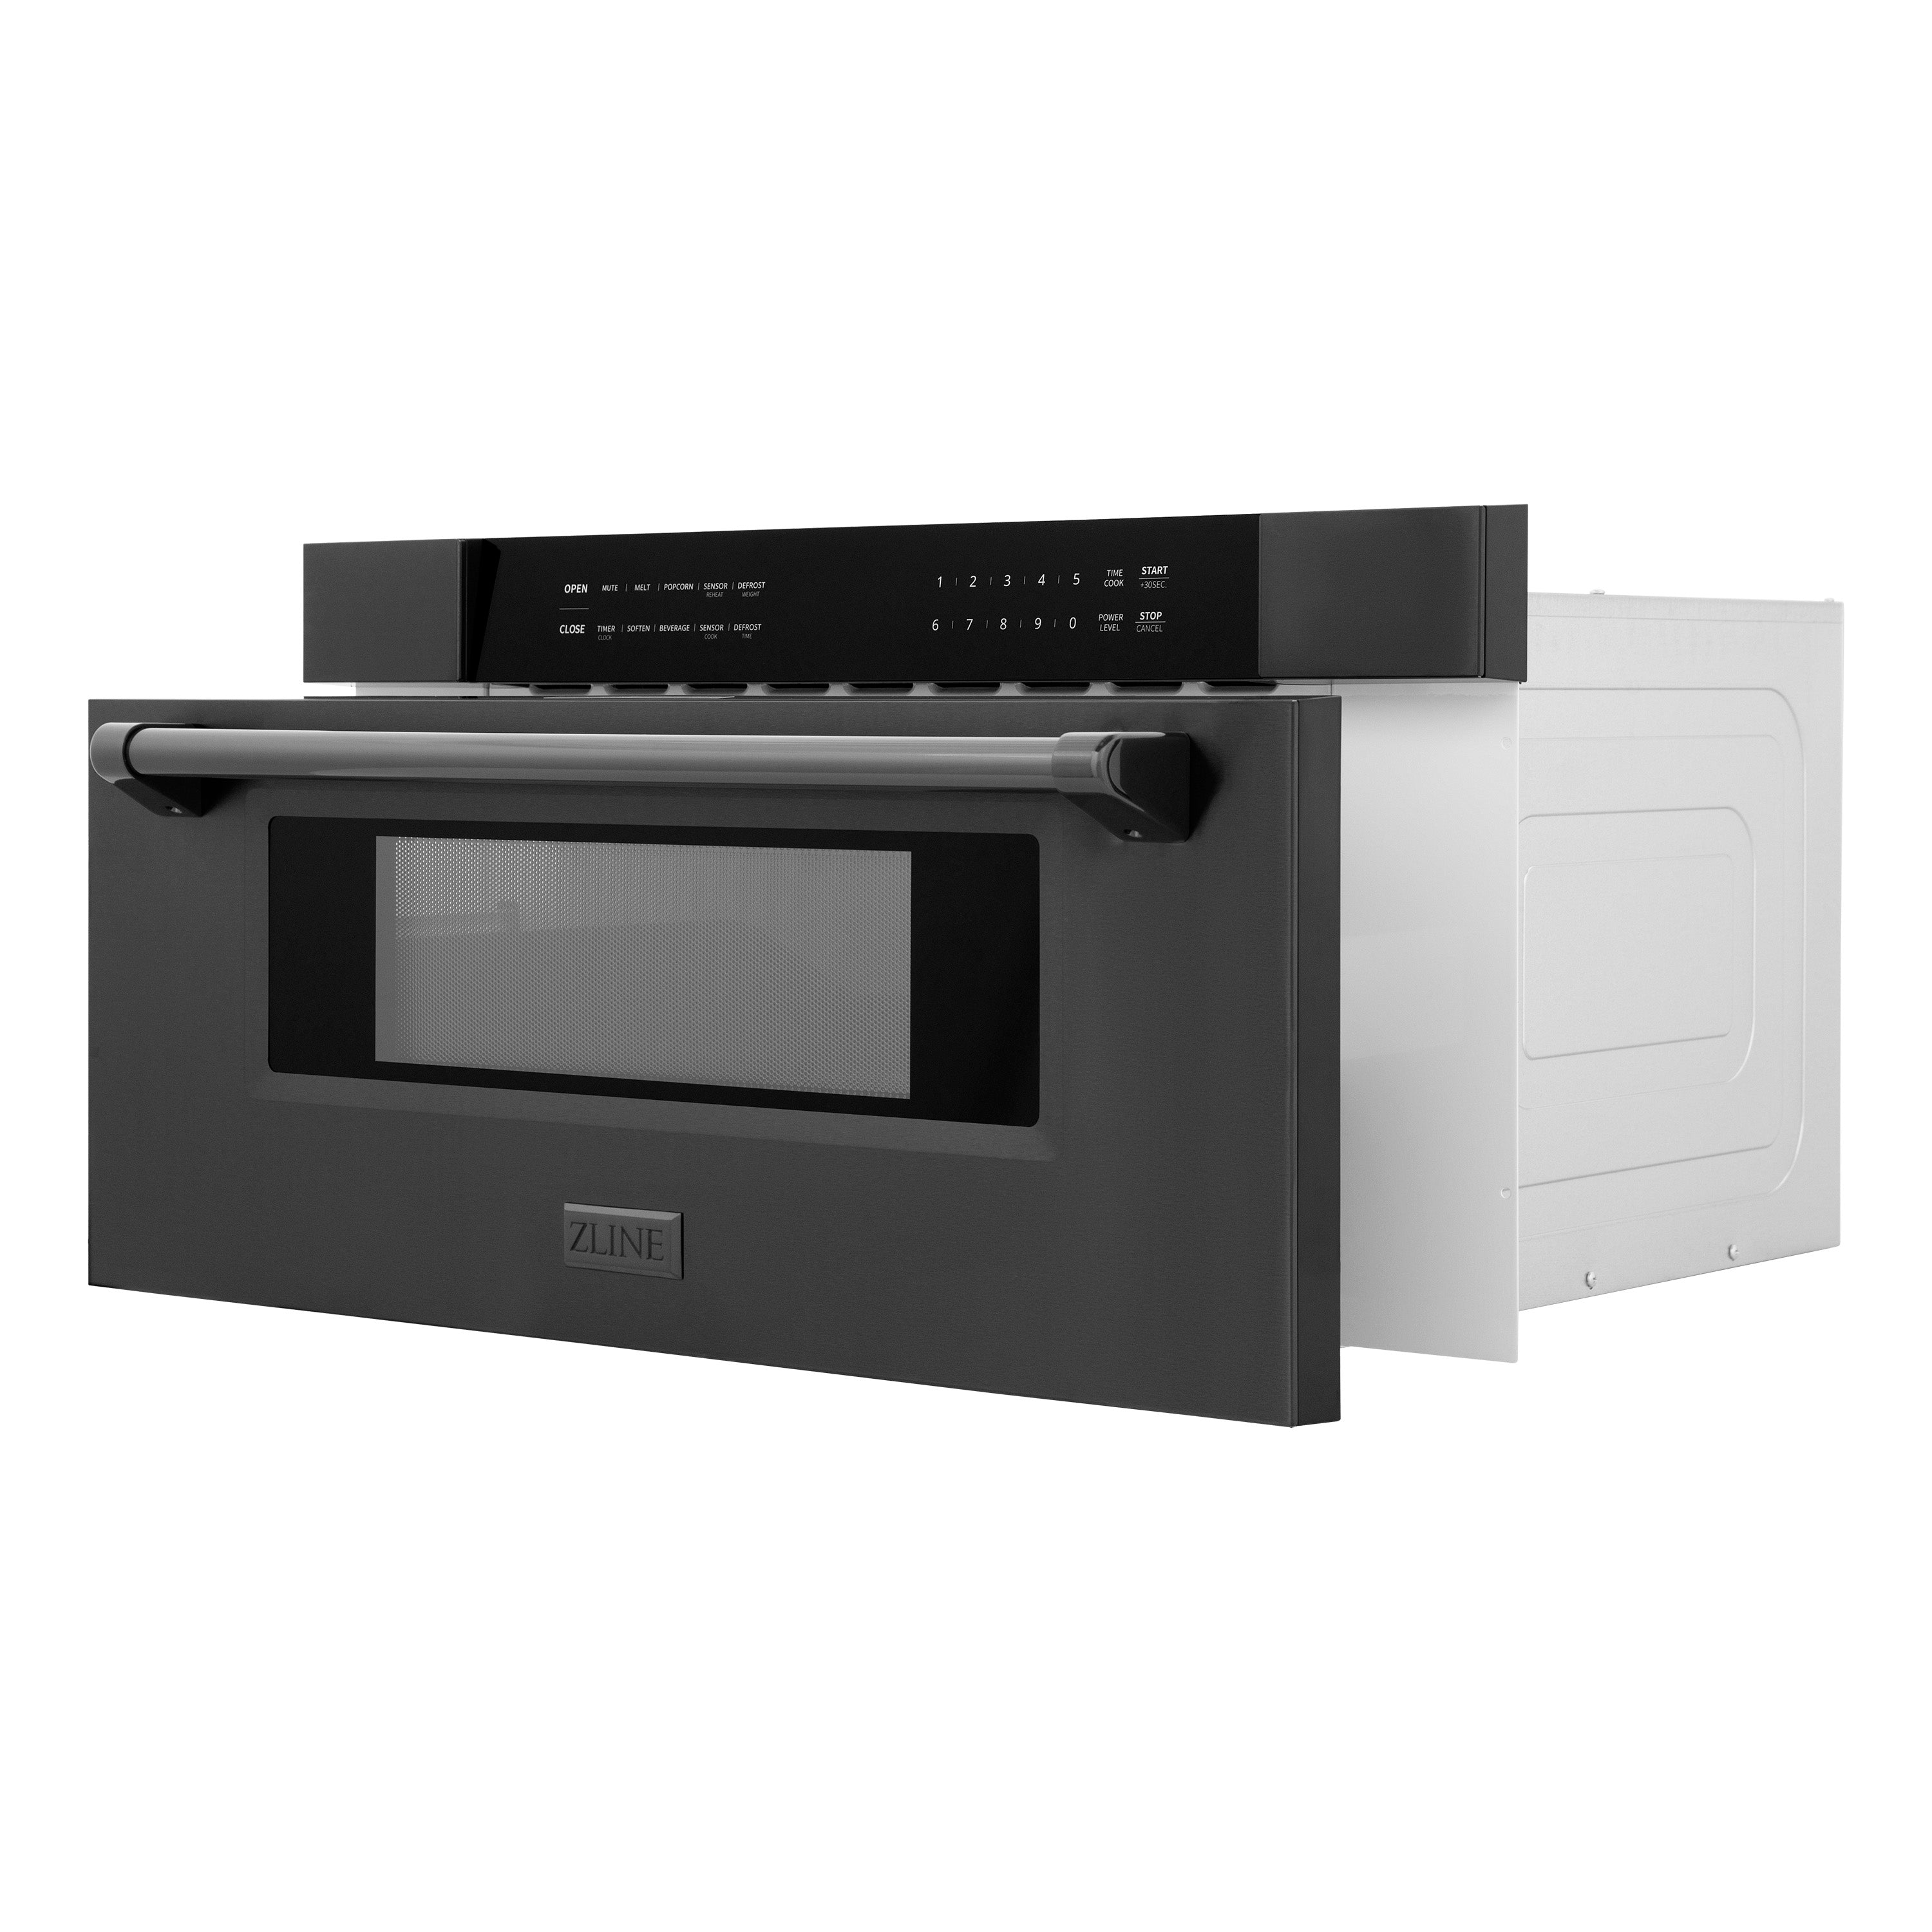 ZLINE 30 in. 1.2 cu. ft. Black Stainless Steel Built-In Microwave Drawer (MWD-30-BS) Side View Drawer Open